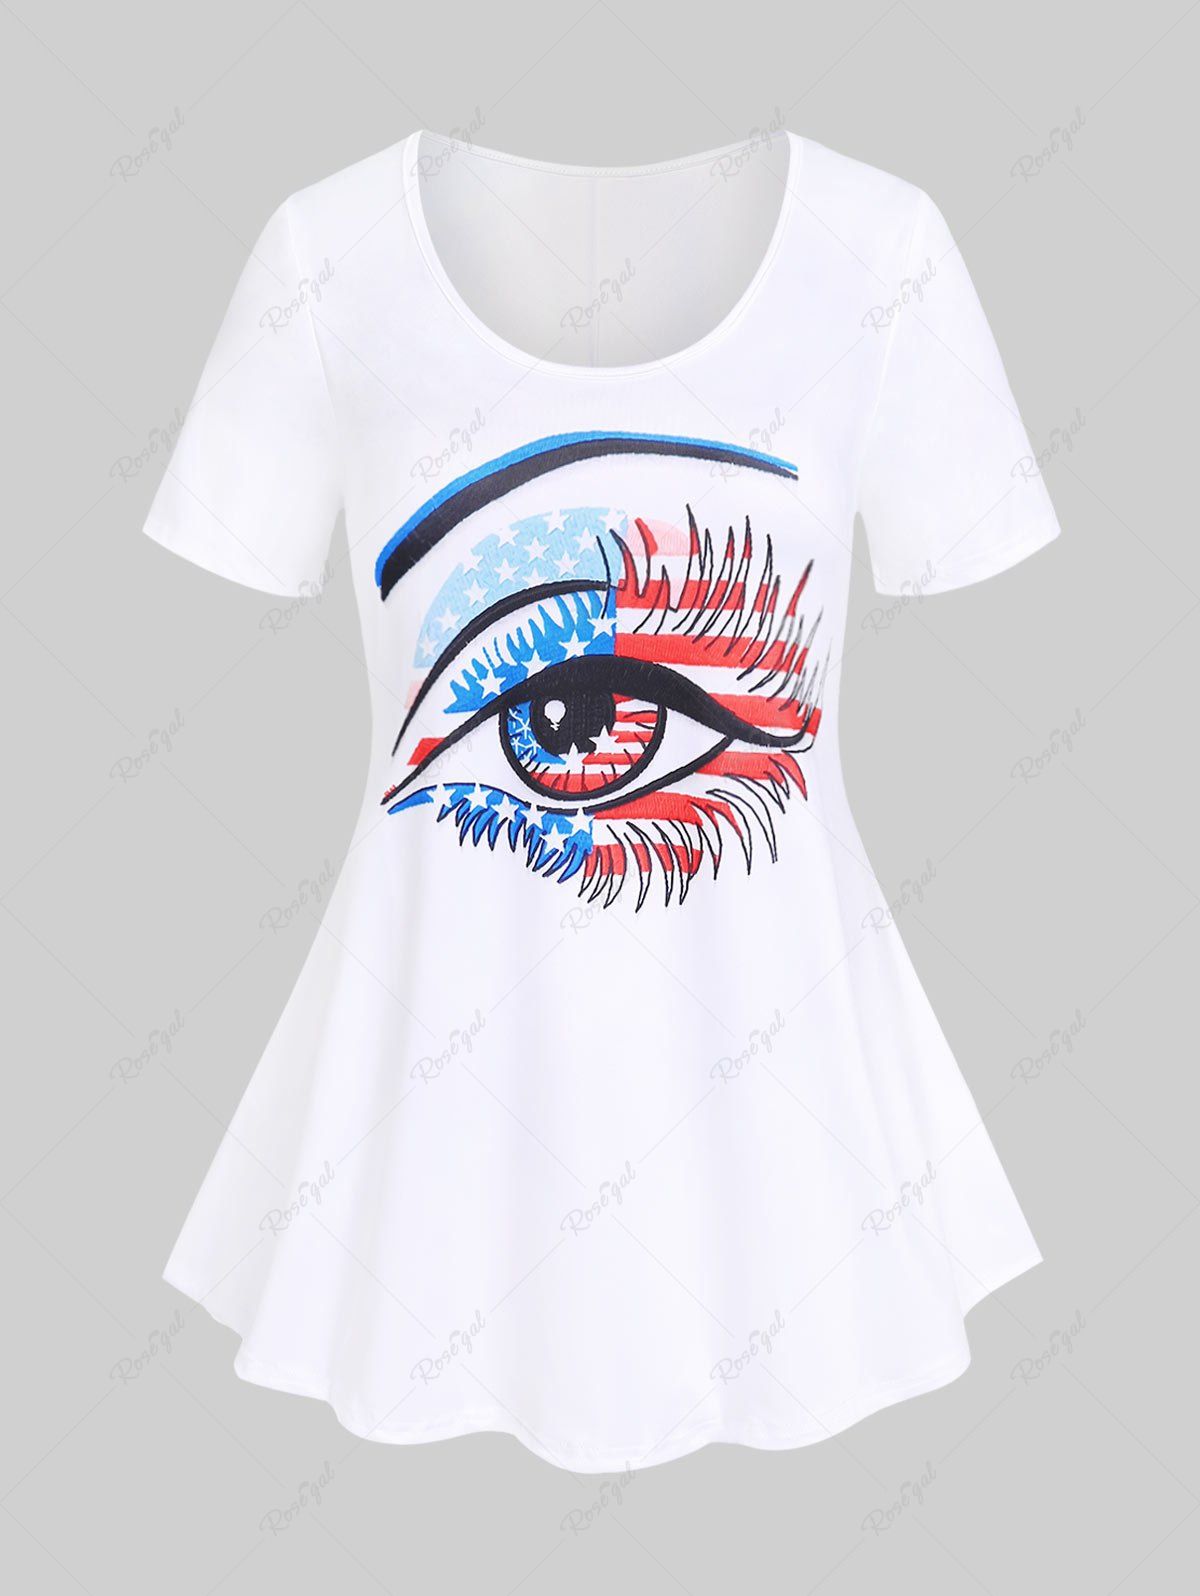 Outfit Plus Size & Curve Patriotic American Flag Eye Print Graphic Tee  